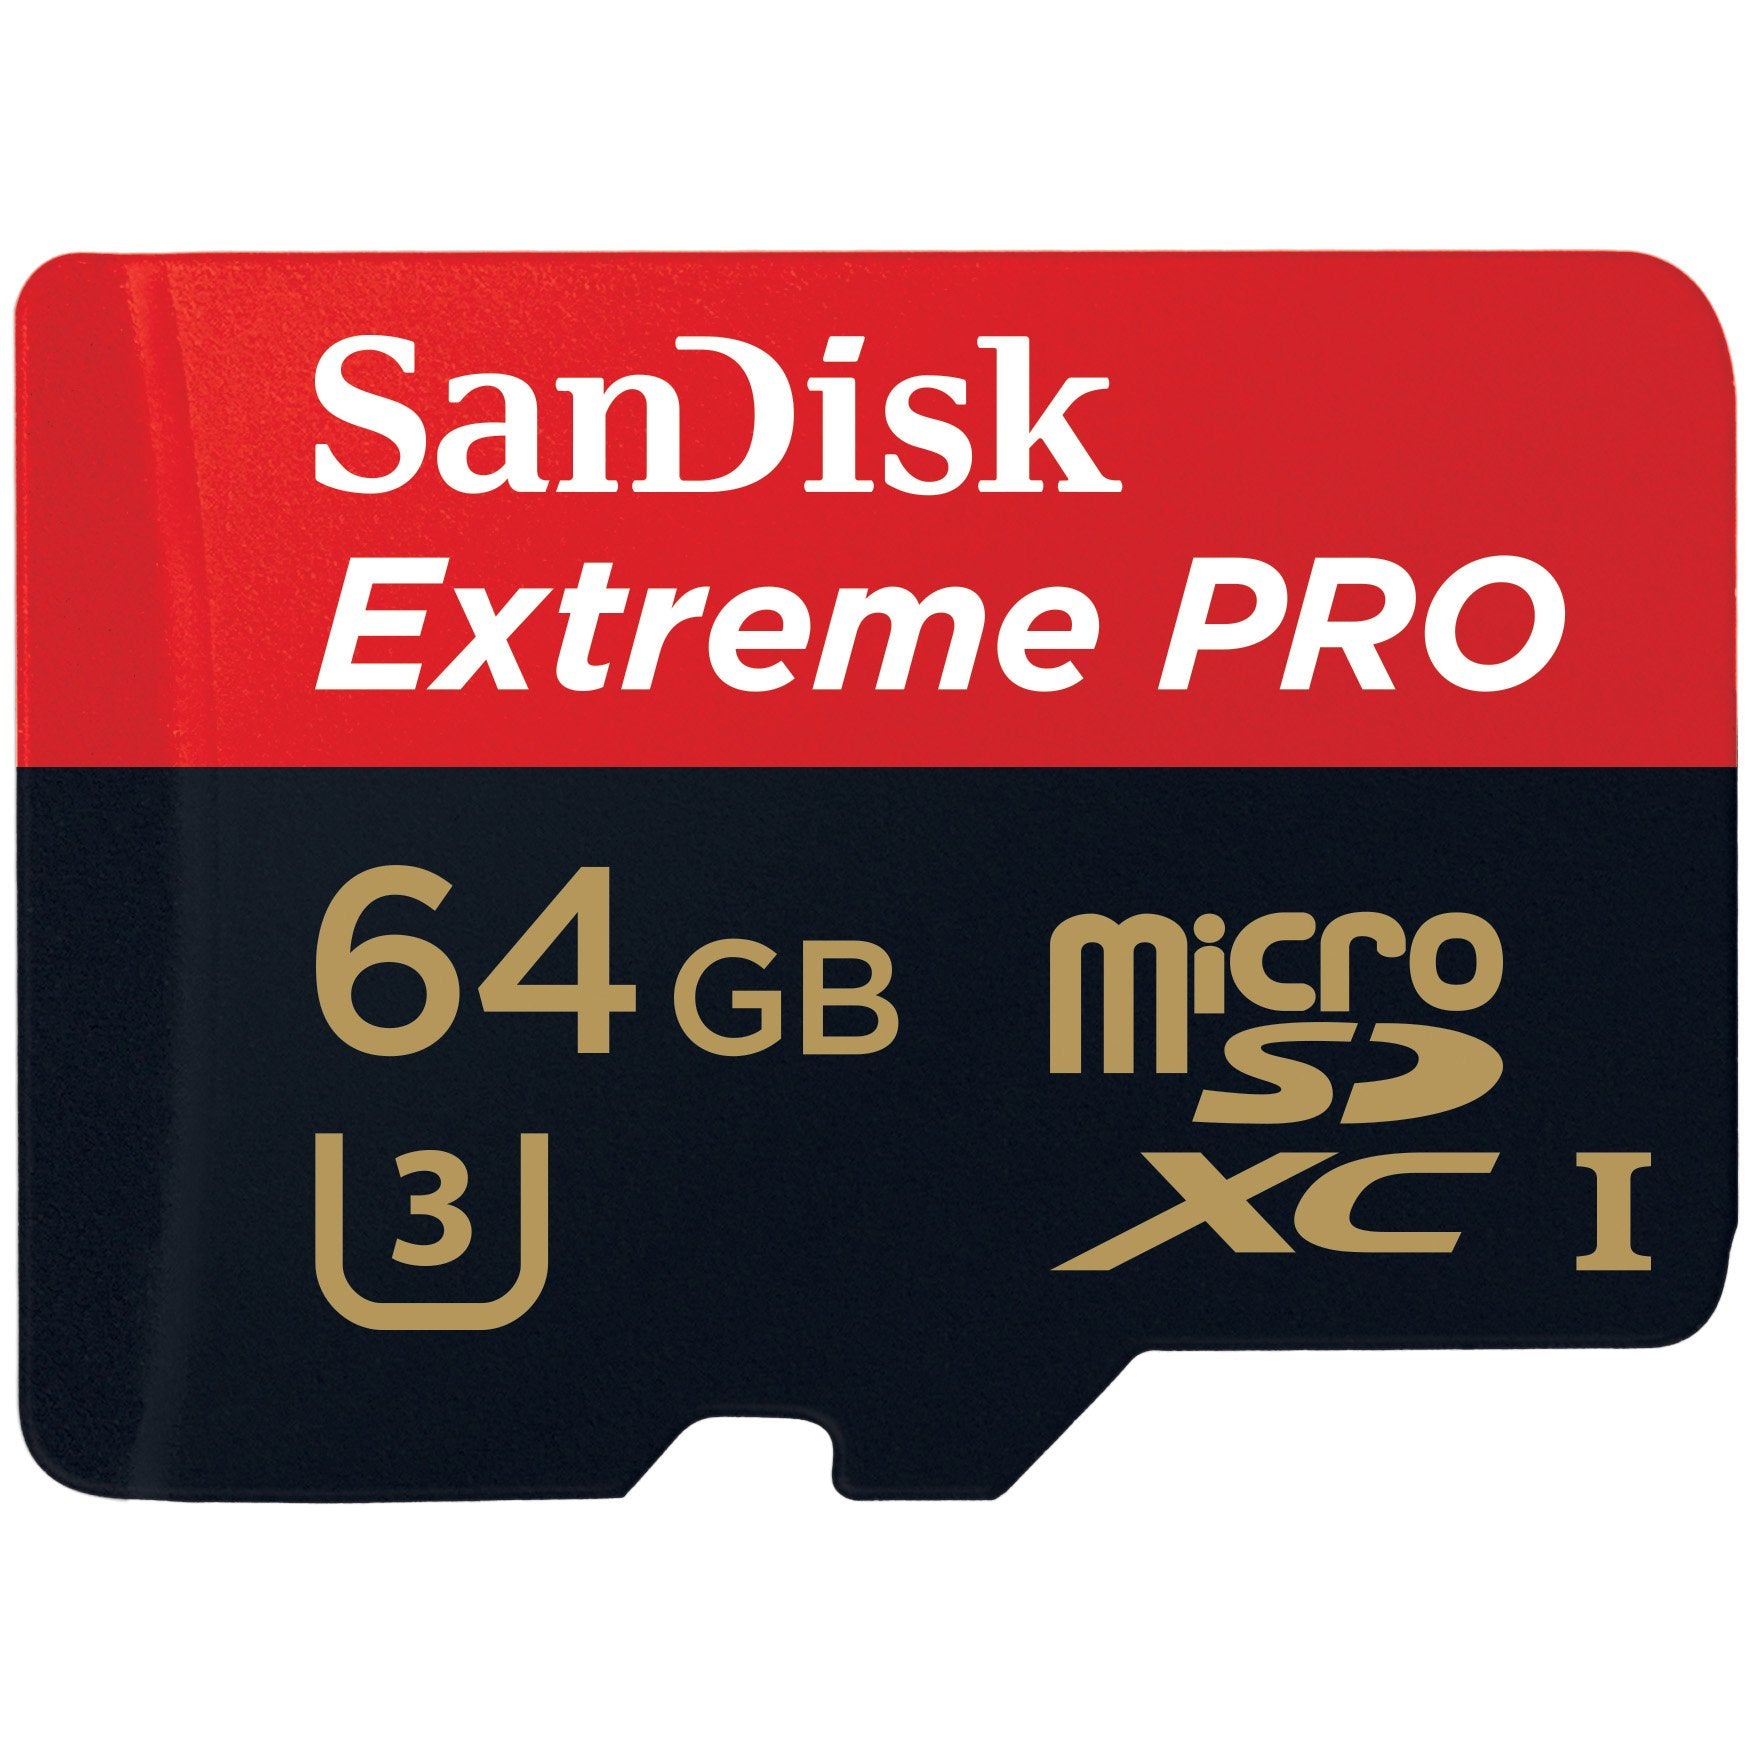 SanDisk Extreme PRO 64GB UHS-I/U3 Micro SDXC Memory Card Speeds Up To 95MB/s With 4K Ultra HD Ready-SDSDQXP-064G